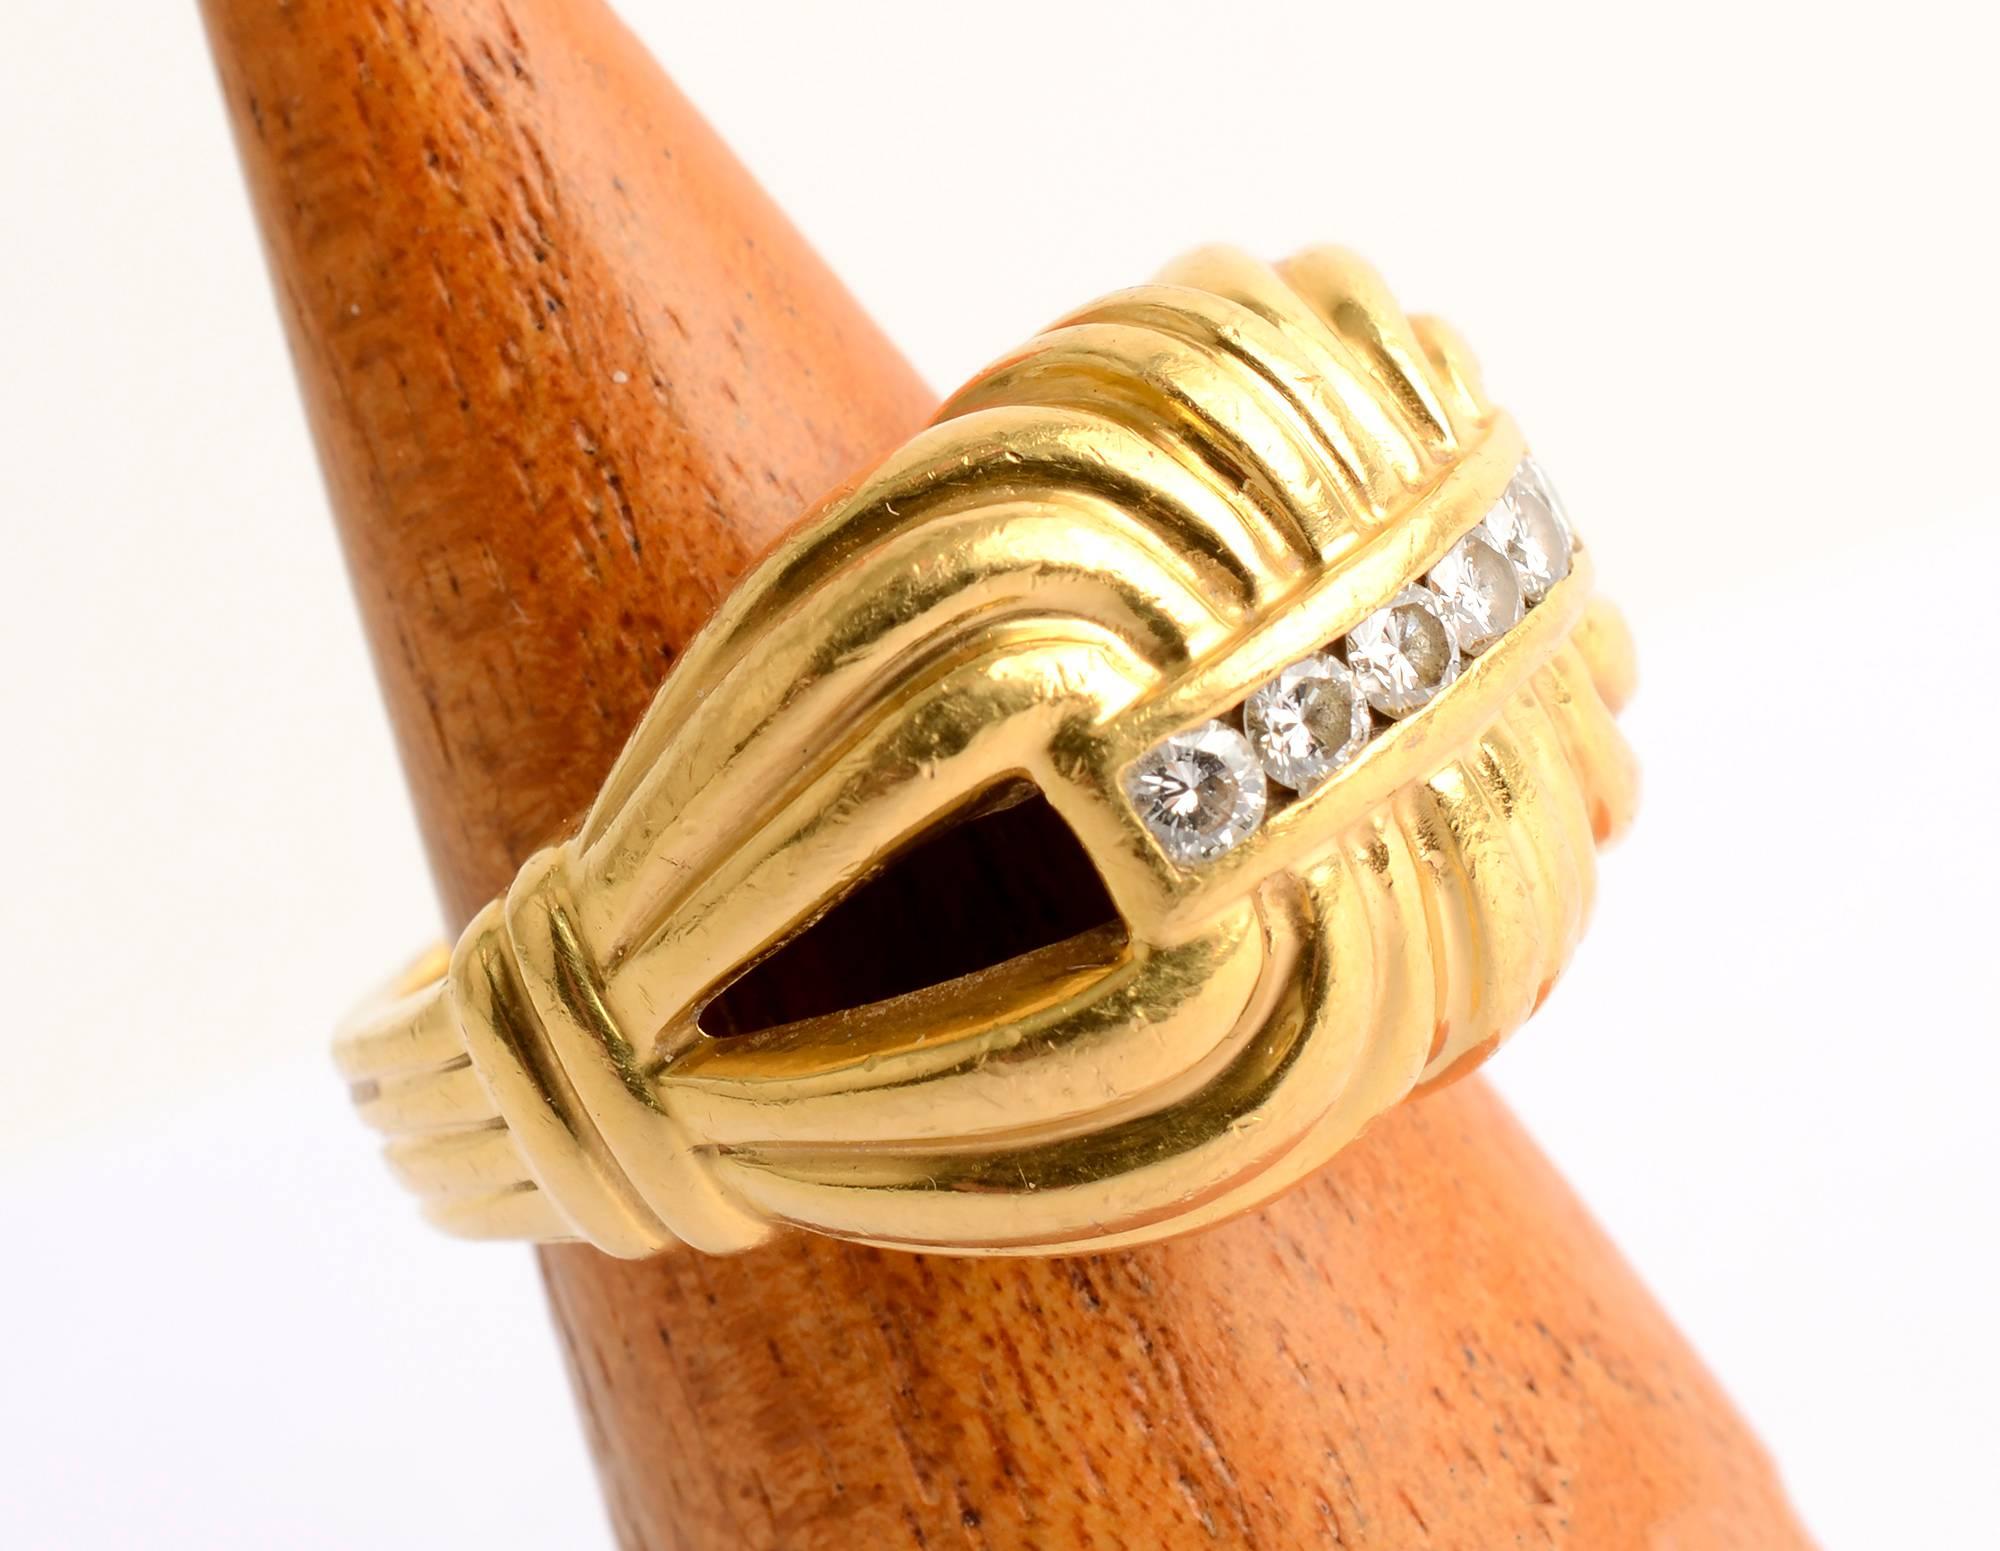 Scroll design ring by Lagos made of 22 karat gold with six diamonds. The banded design continues throughout the shank.
The ring is size 7 1/2. This substantial ring  would look equally good worn by a man or woman.